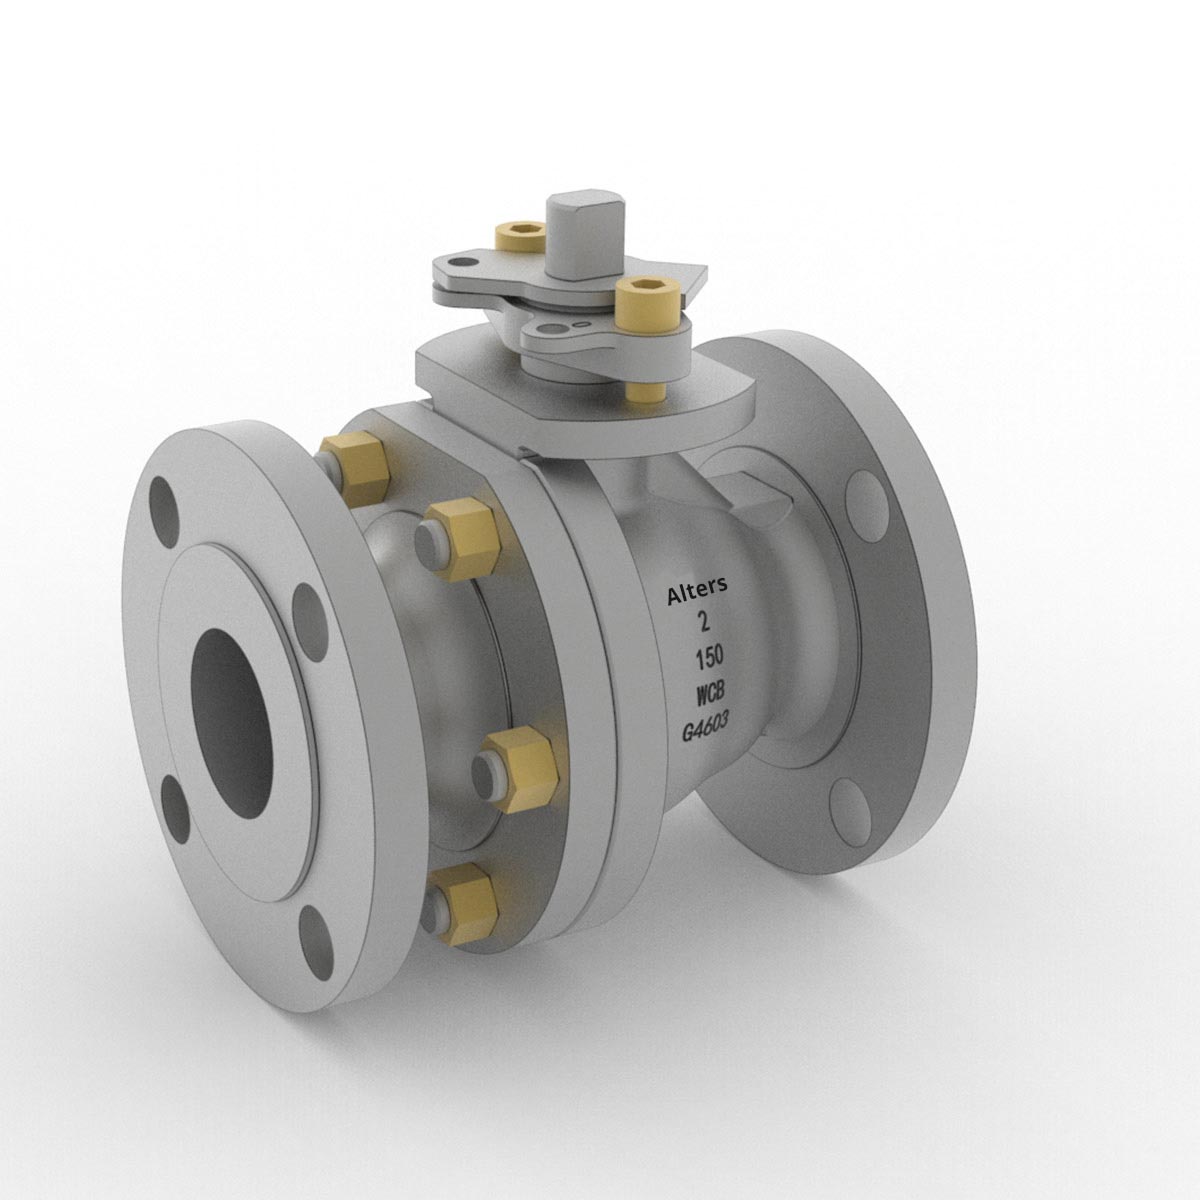 Casting Steel Floating Ball Valve from AlterValve with the company name and specifications.